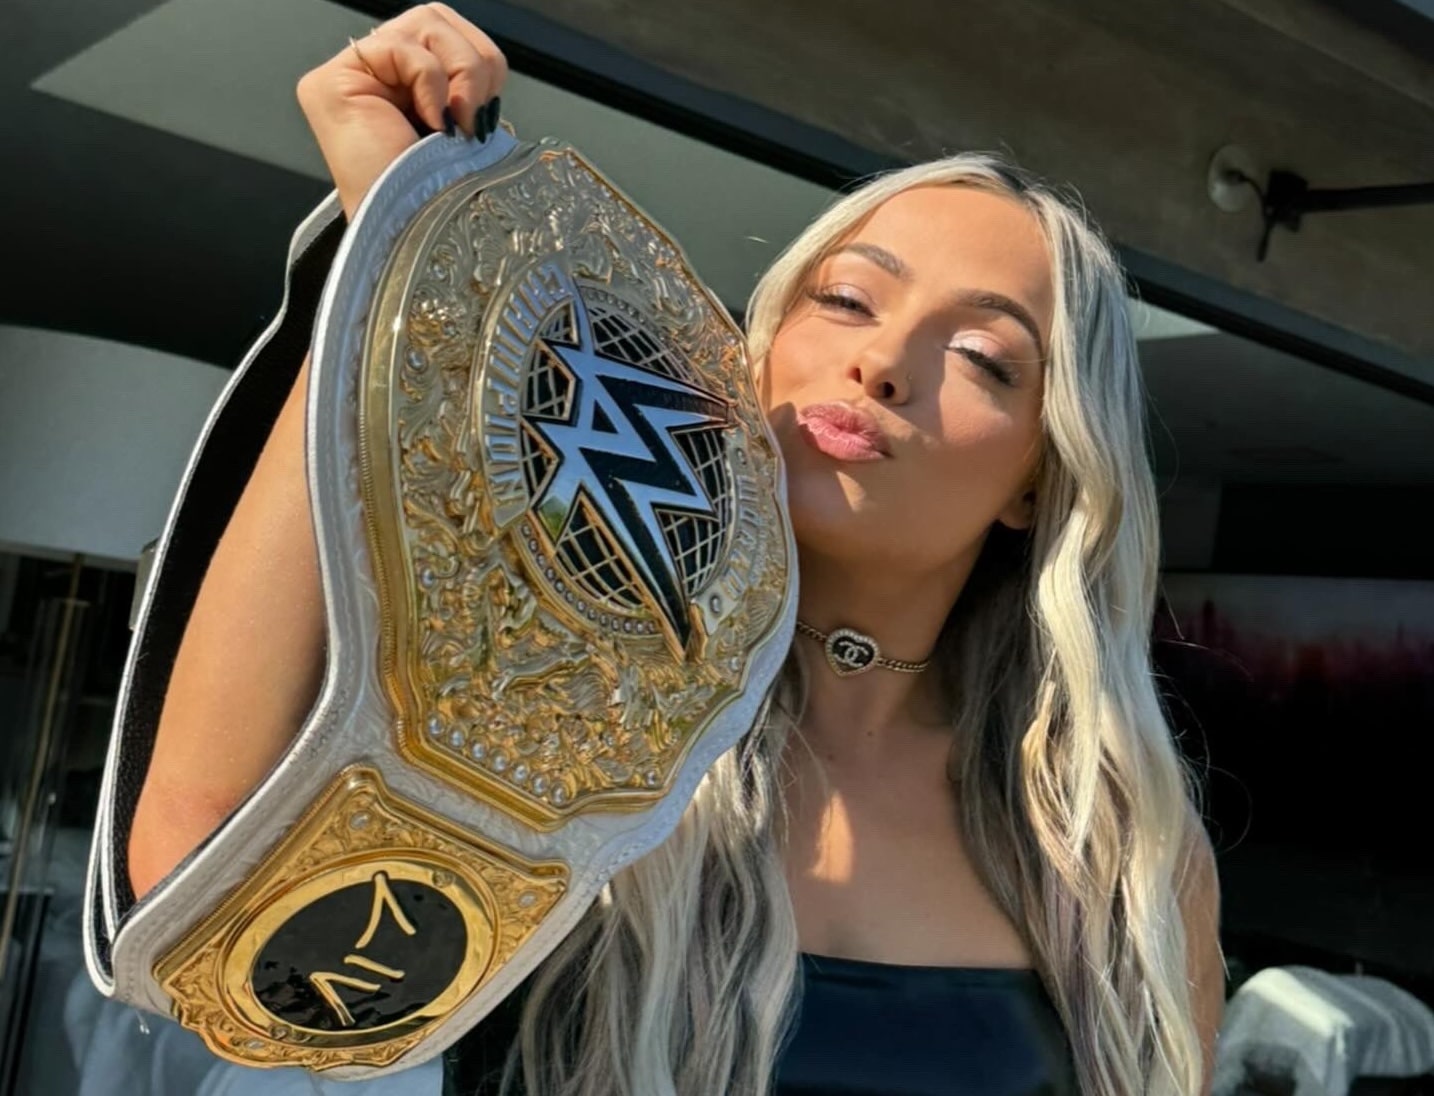 Liv Morgan – ‘I Locked Lips With a Lad And Found It Pleasing’